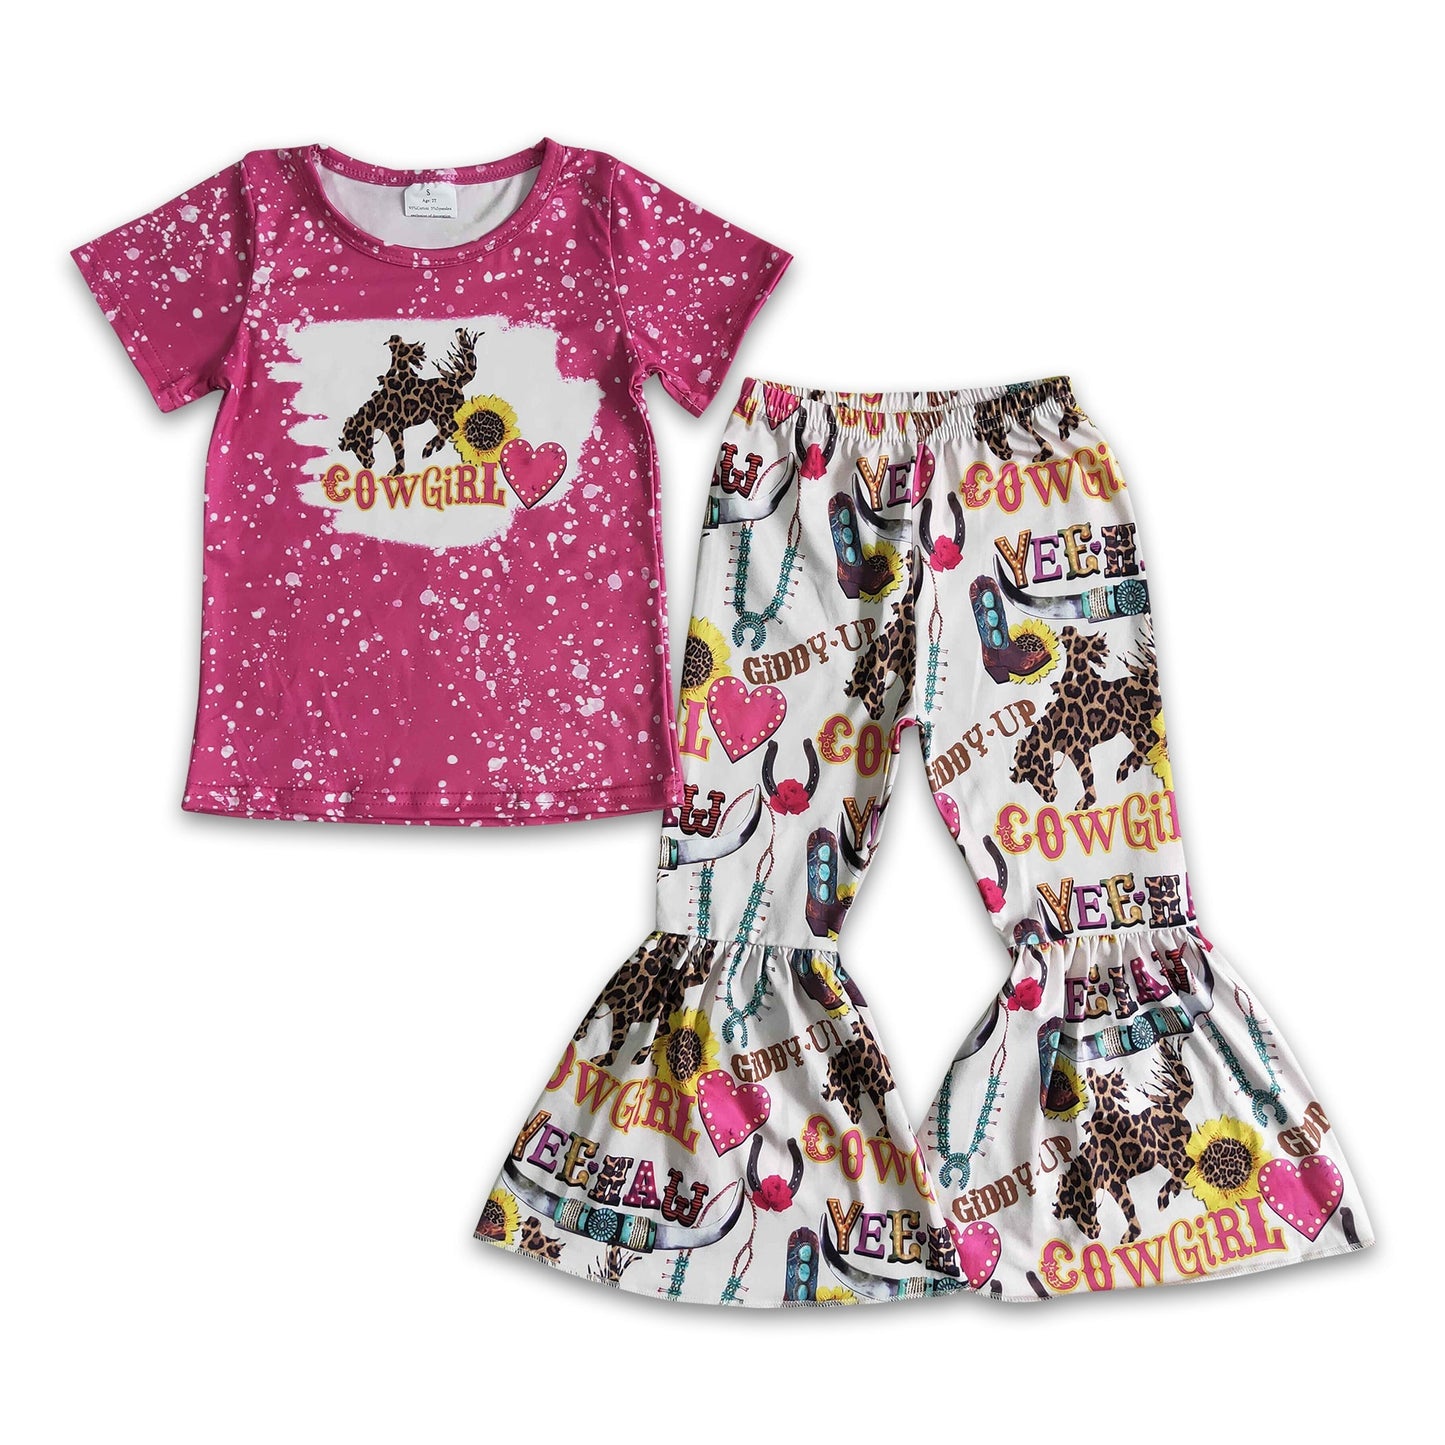 Cowgirl bleached shirt bell bottom pants girls western clothing set